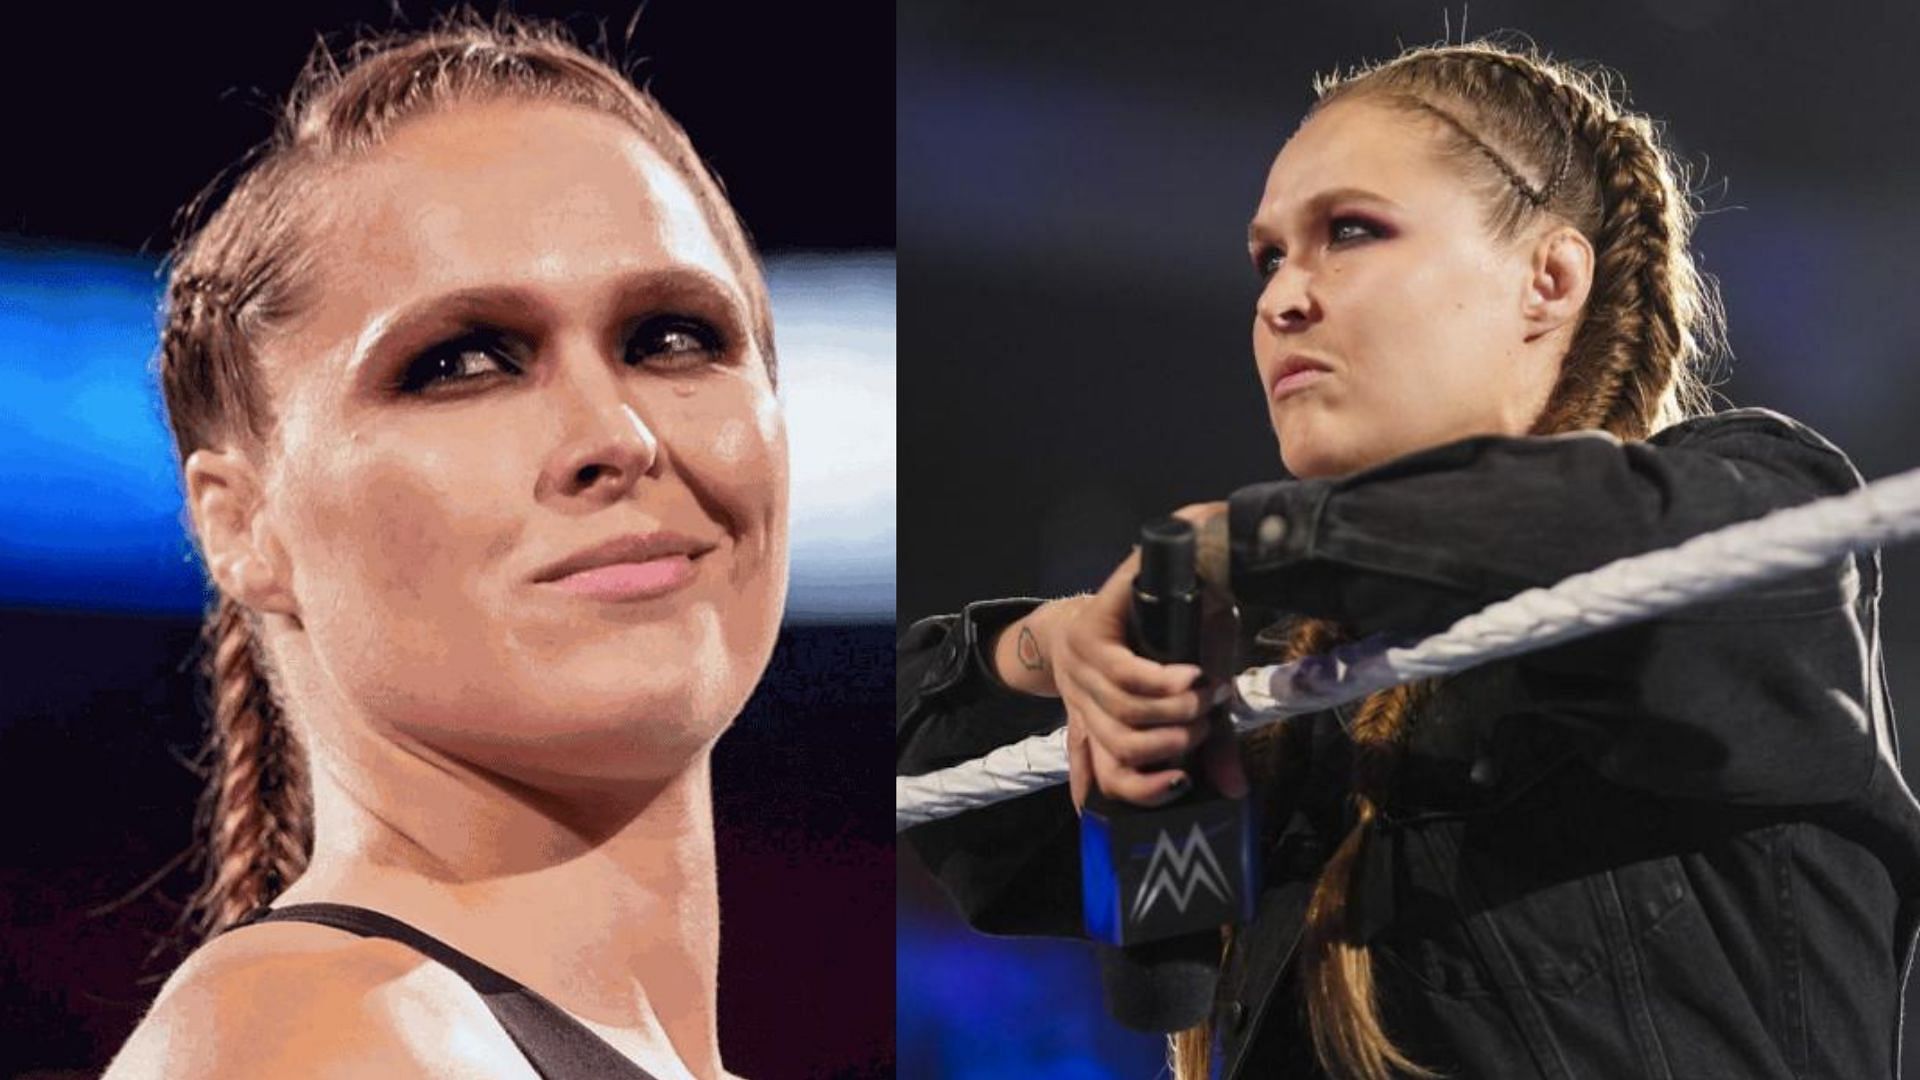 Rousey is set to compete in a match soon.